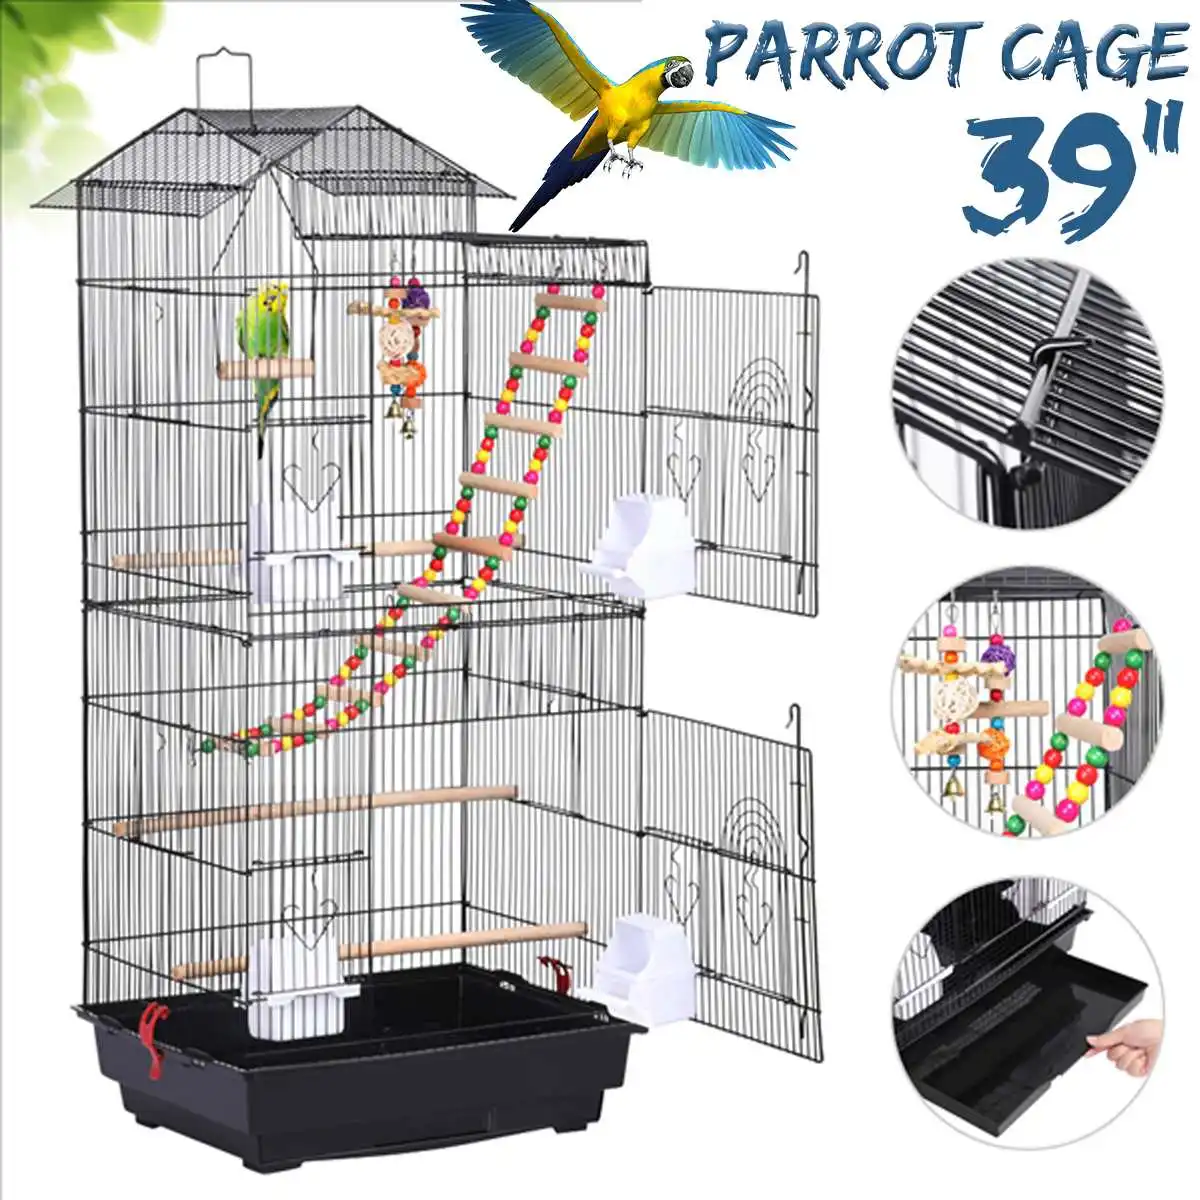 NEW 39" Bird Cage Metal Bird House Iron Parrot Cage Metal Peony Wren  Breeding Cage Nest Bed Iron With Pigeon Supplies|Bird Cages & Nests| -  AliExpress